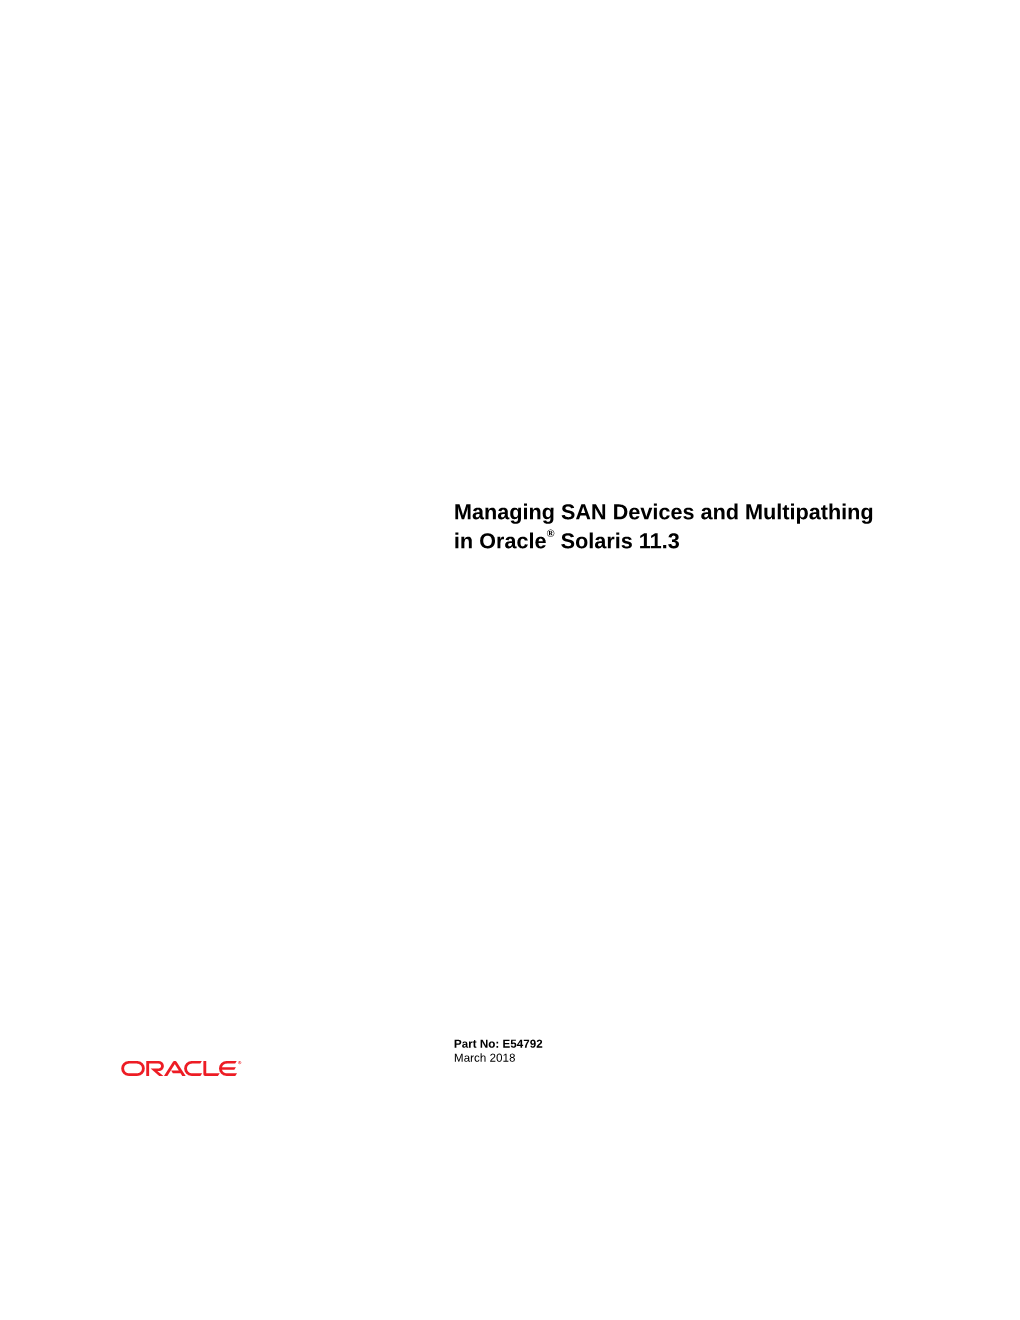 Managing SAN Devices and Multipathing in Oracle® Solaris 11.3